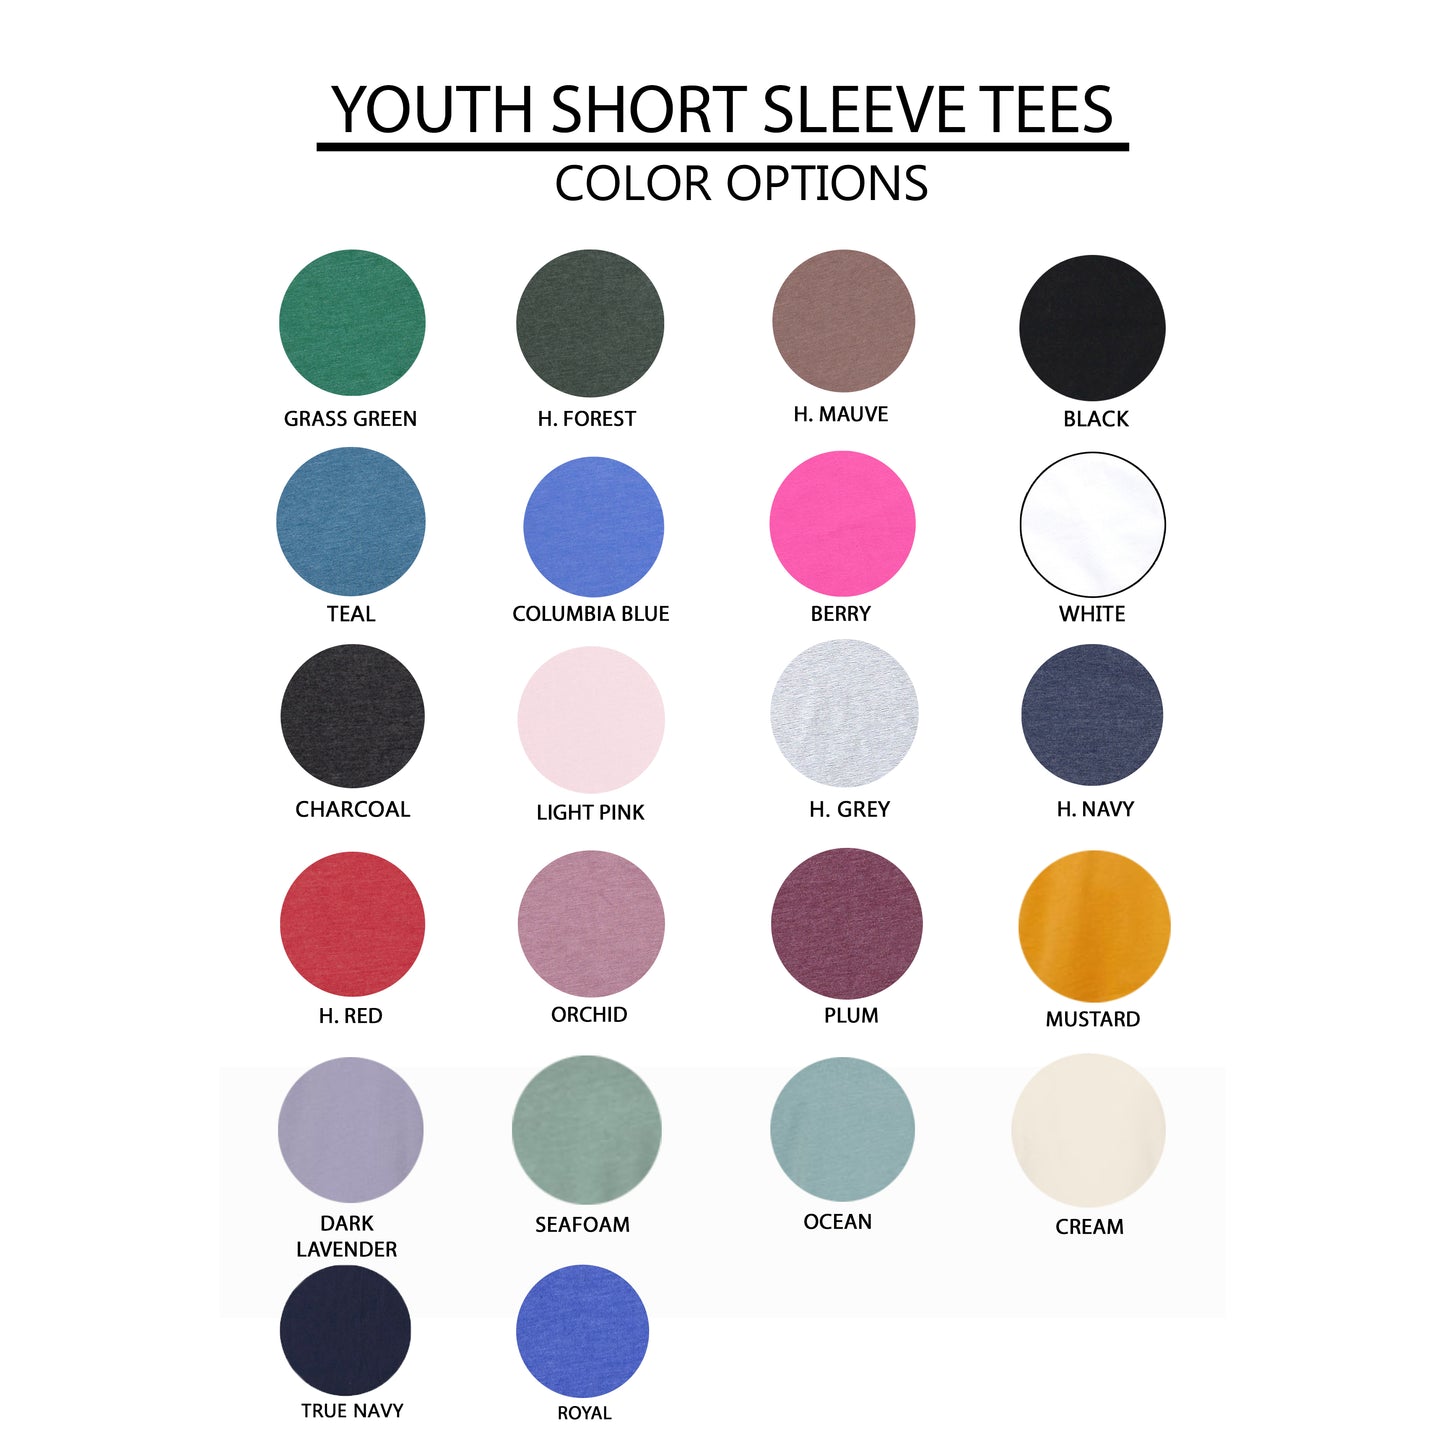 Big Sis Square | Youth Short Sleeve Crew Neck